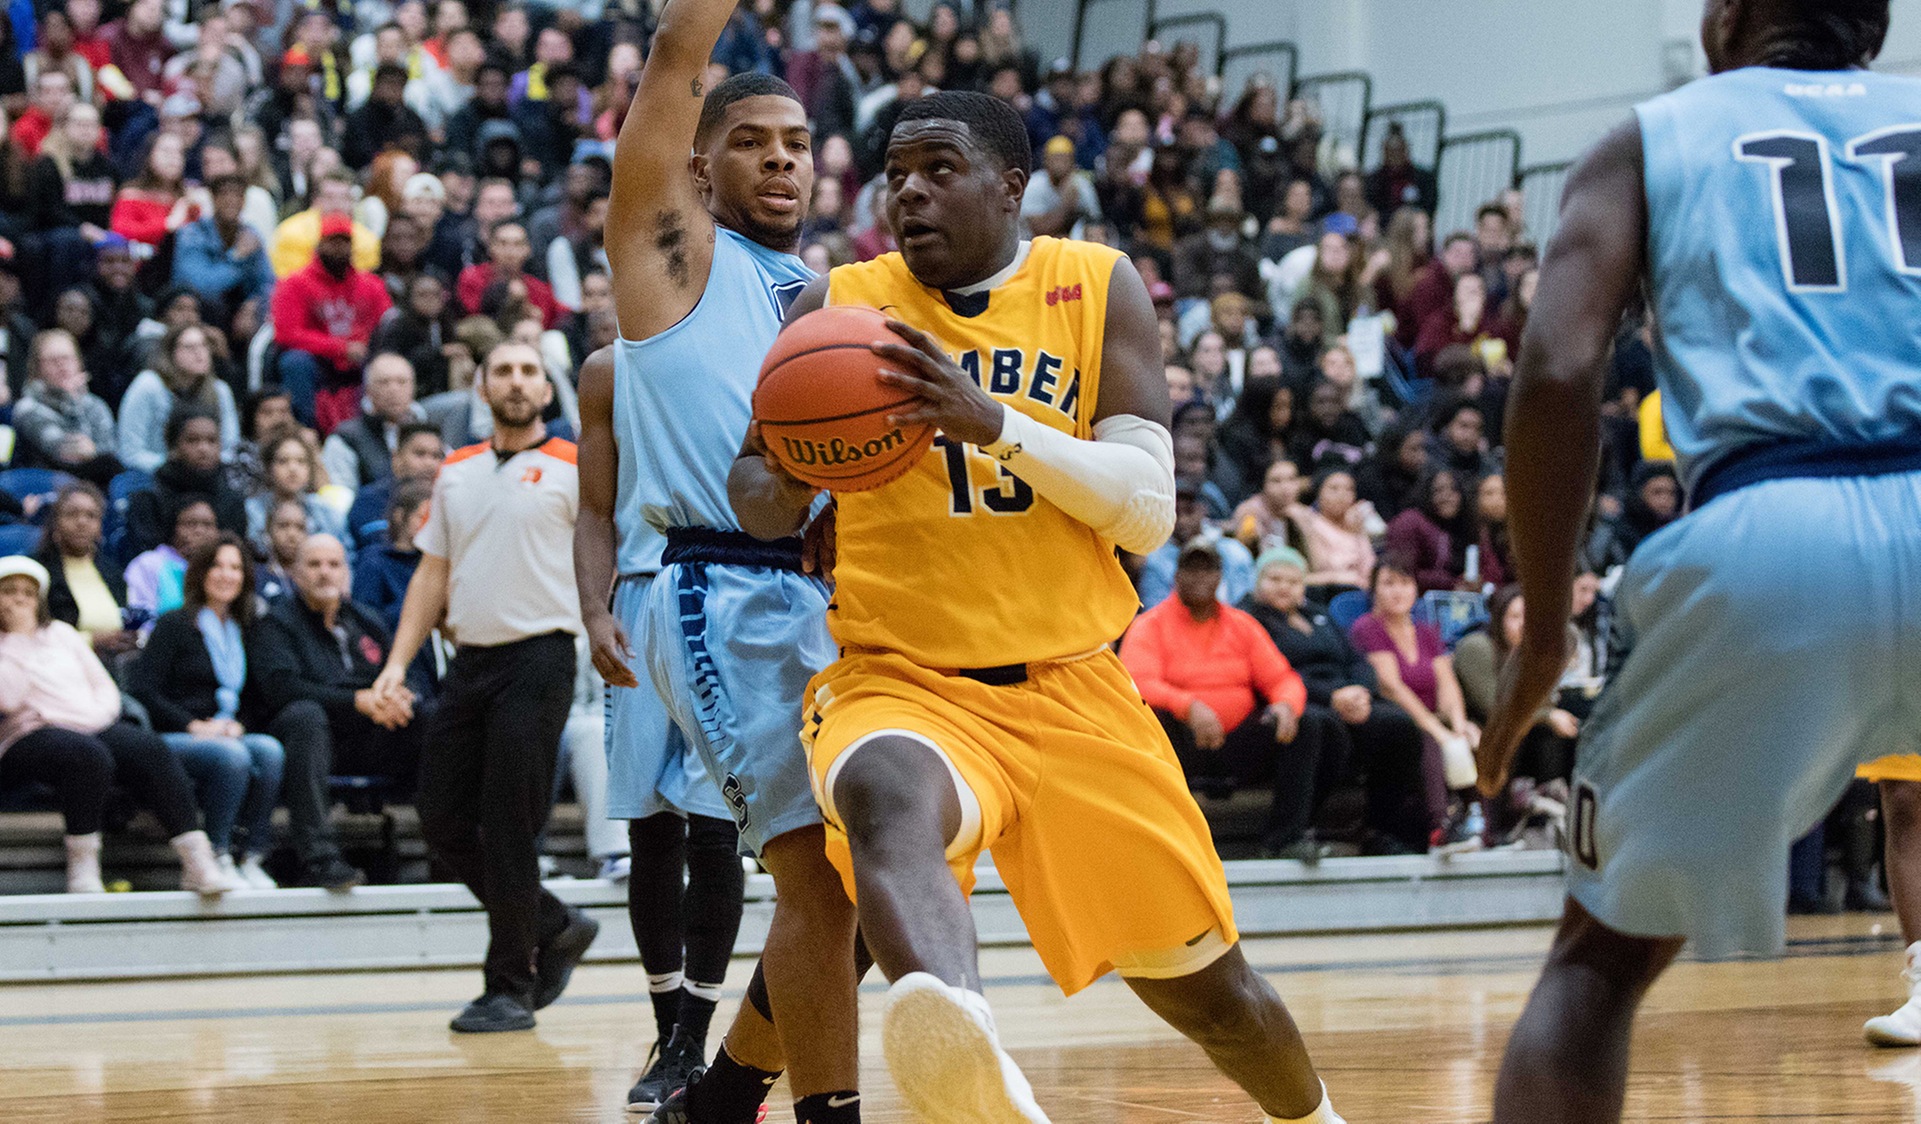 ANOTHER HAWKS/BRUINS CLASSIC ENDS IN 81-78 HOME WIN FOR HUMBER